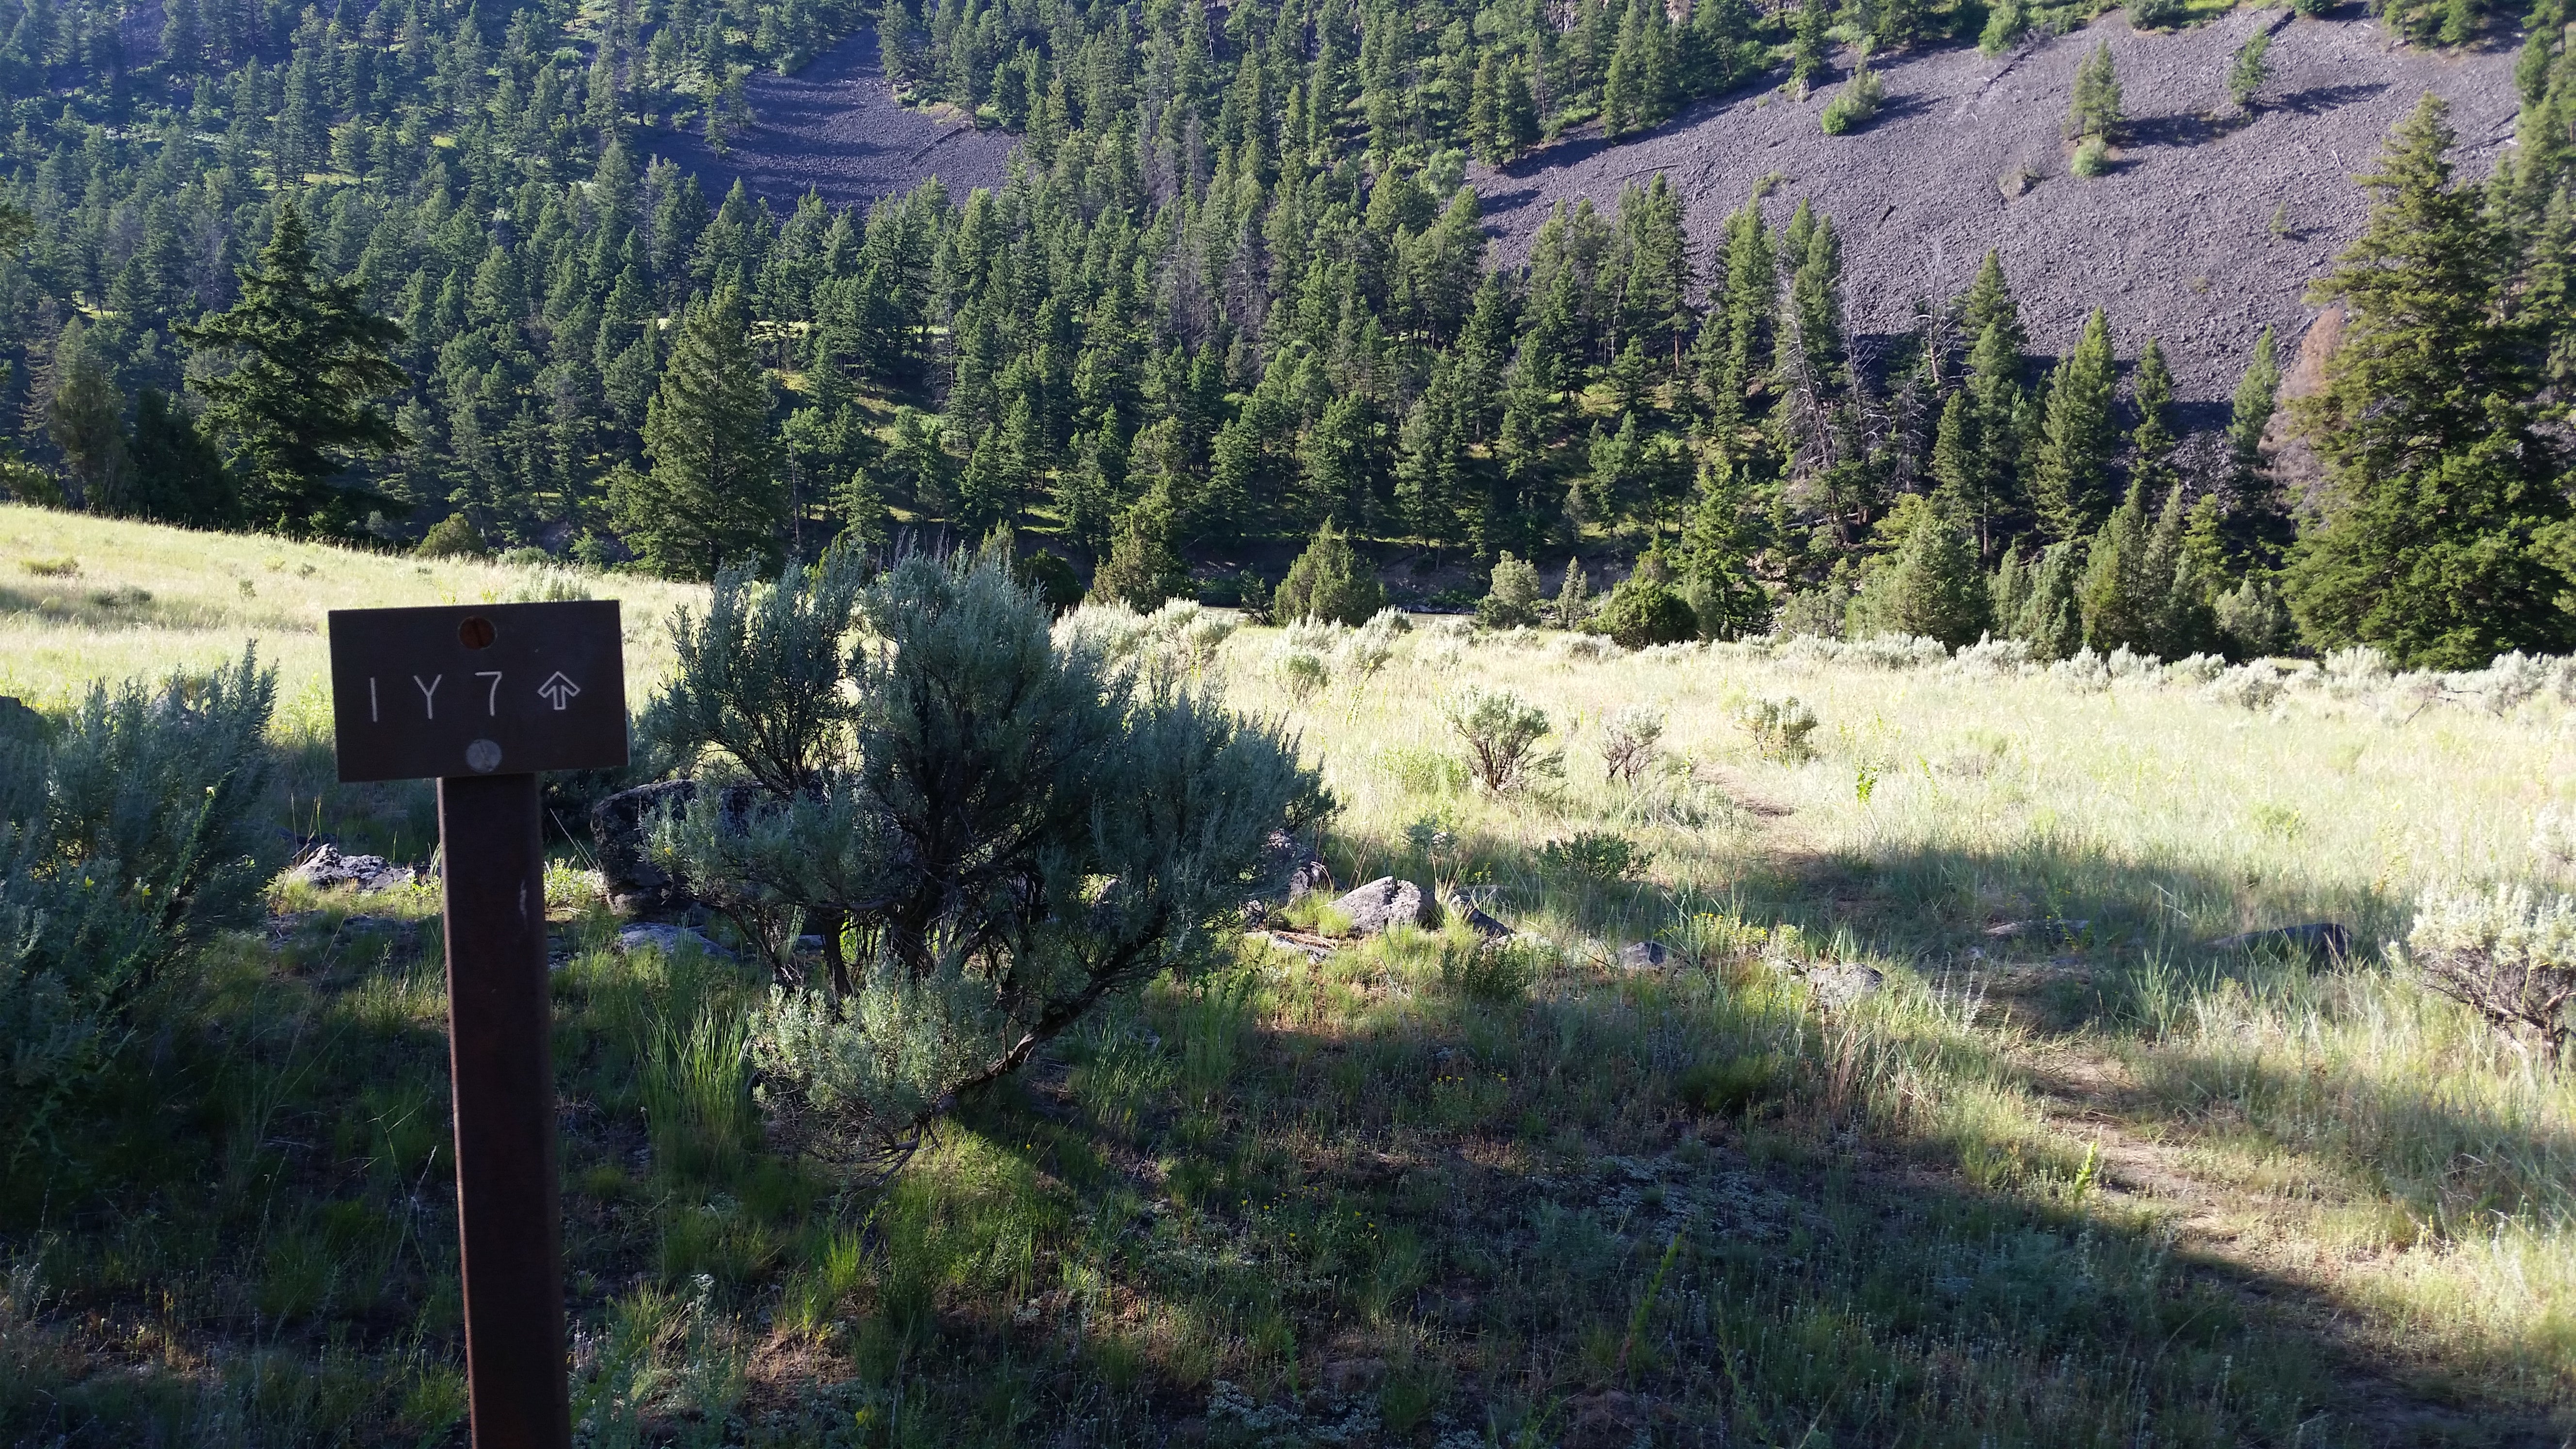 Camper submitted image from 1Y7 Yellowstone N.P. Backcountry campsite — Yellowstone National Park - 1